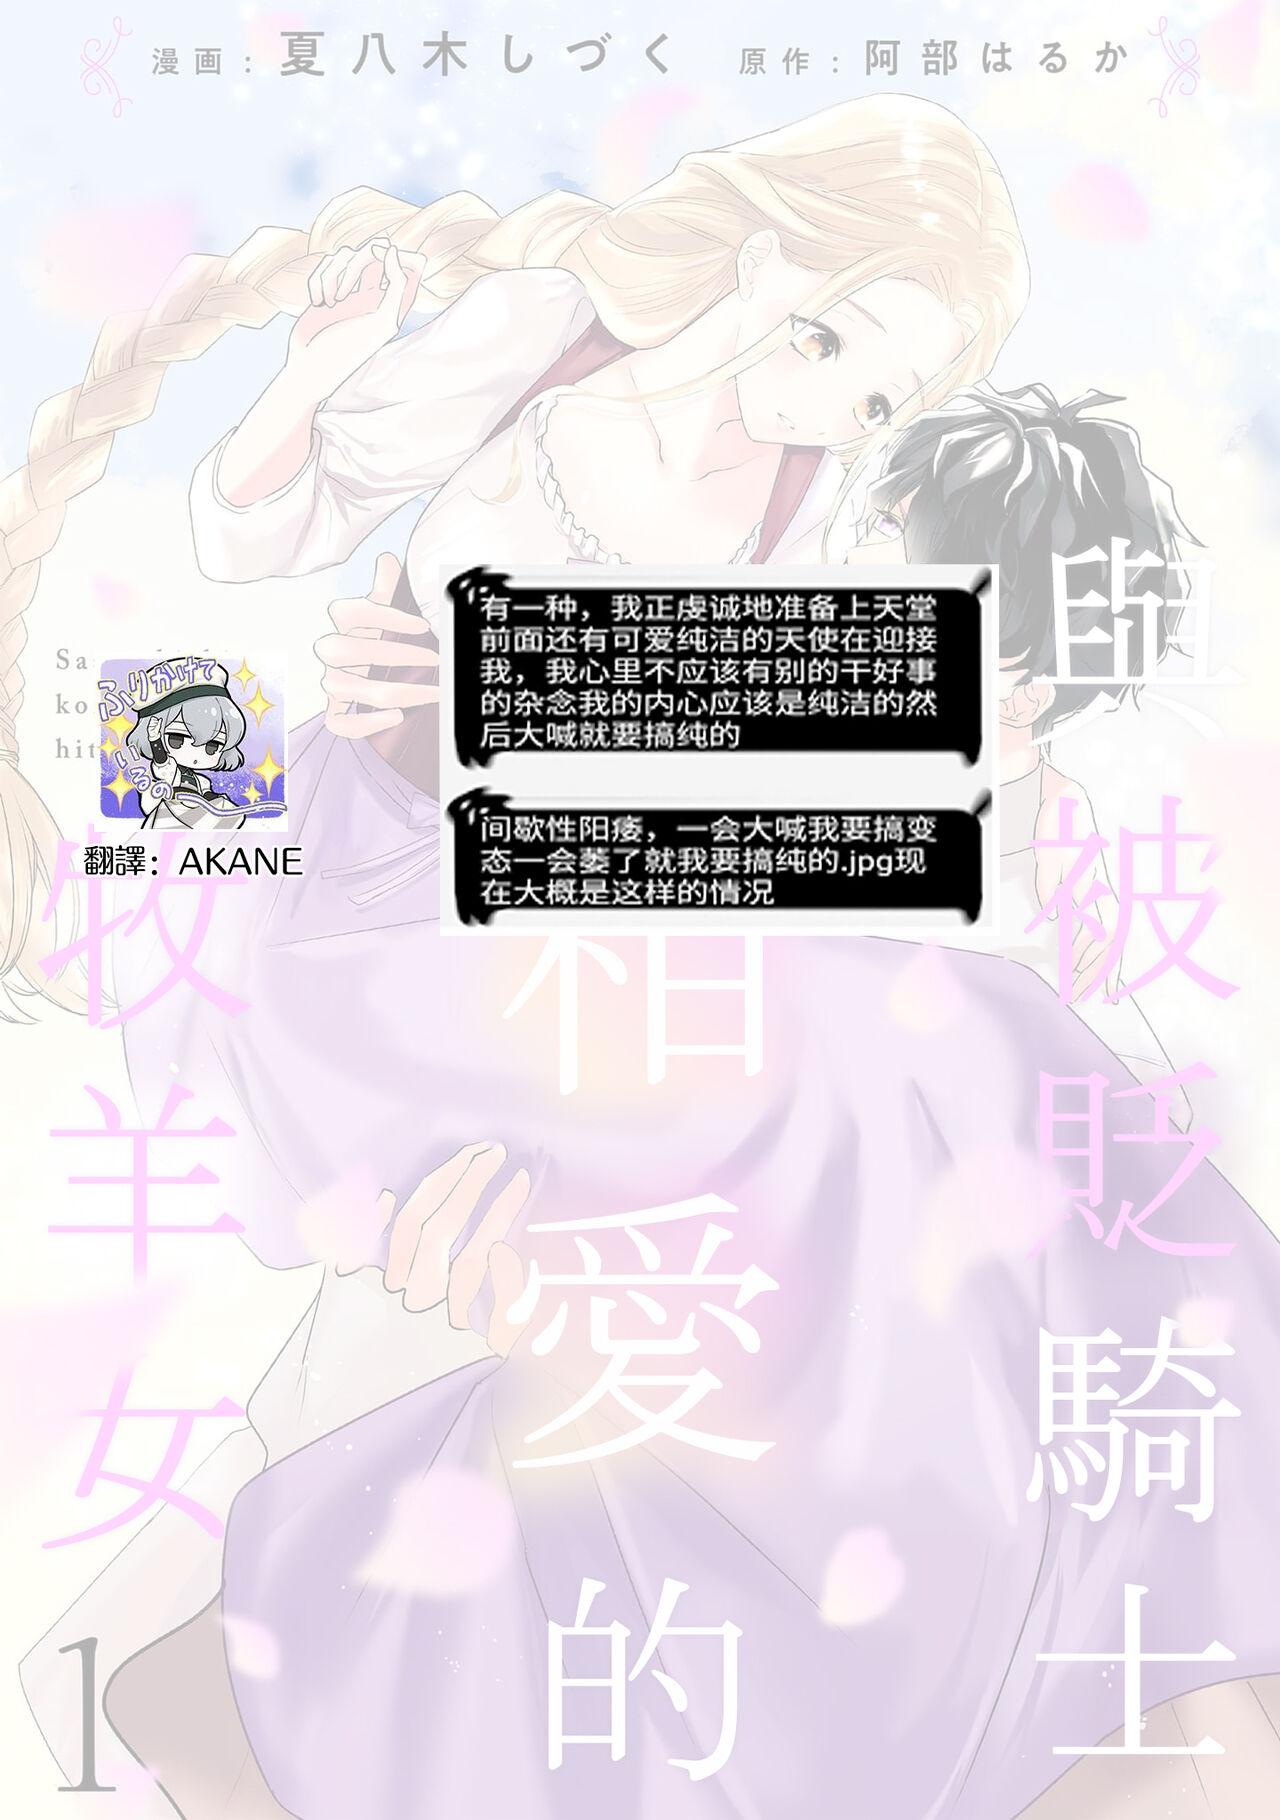 A shepherd in love with a demoted knight | 与被贬骑士相爱的牧羊女1 35